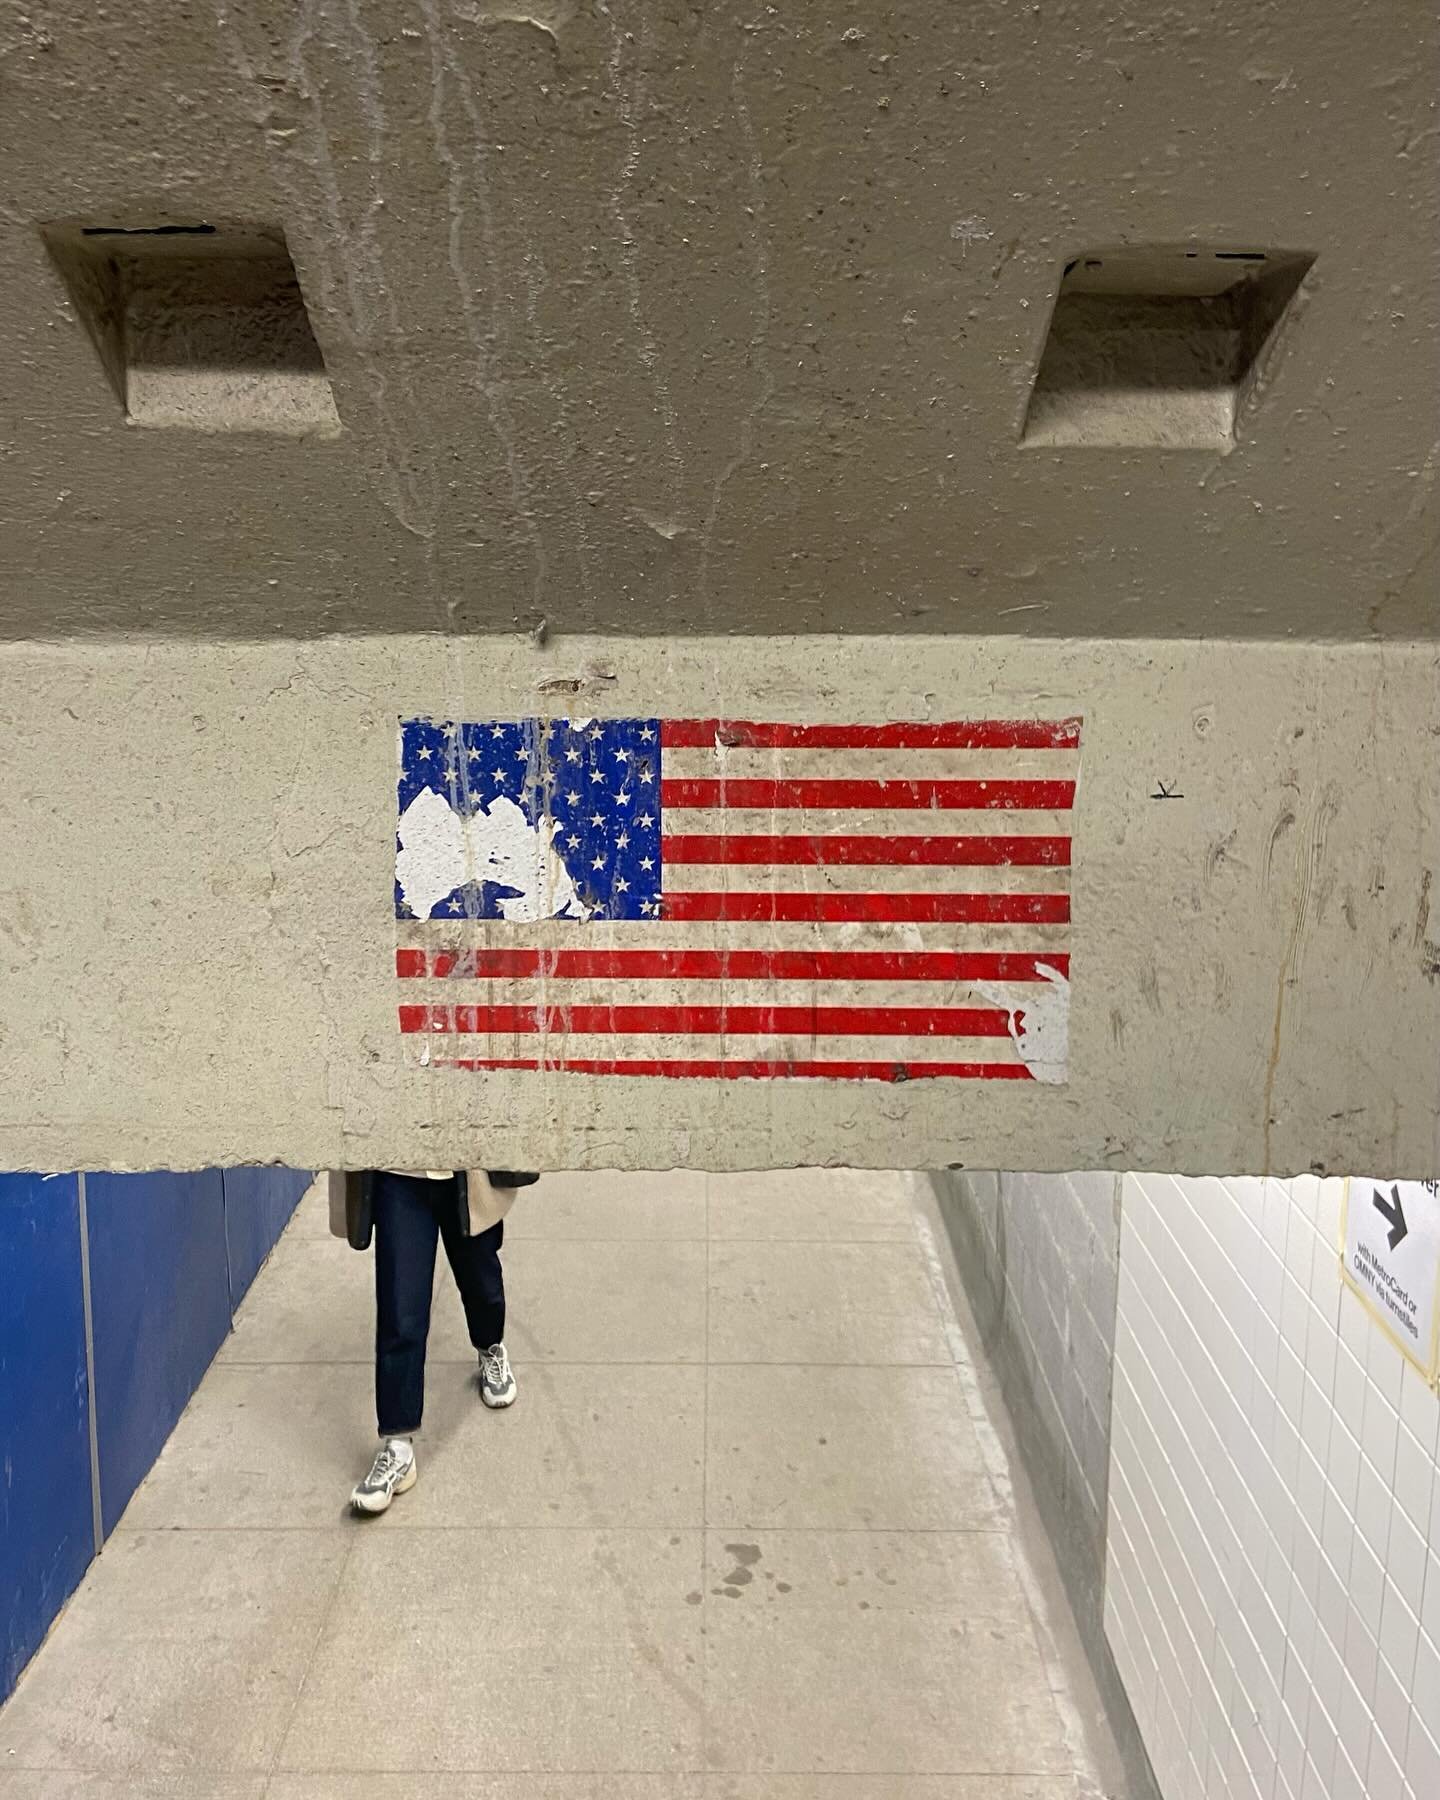 Happy Sunday! Here&rsquo;s another batch of inspiration photos. The American flag, a powerful symbol, is always ripe for creative remixes and reinterpretations.

1. Amidst a surge of patriotic sentiment in the USA, American flags were placed in subwa